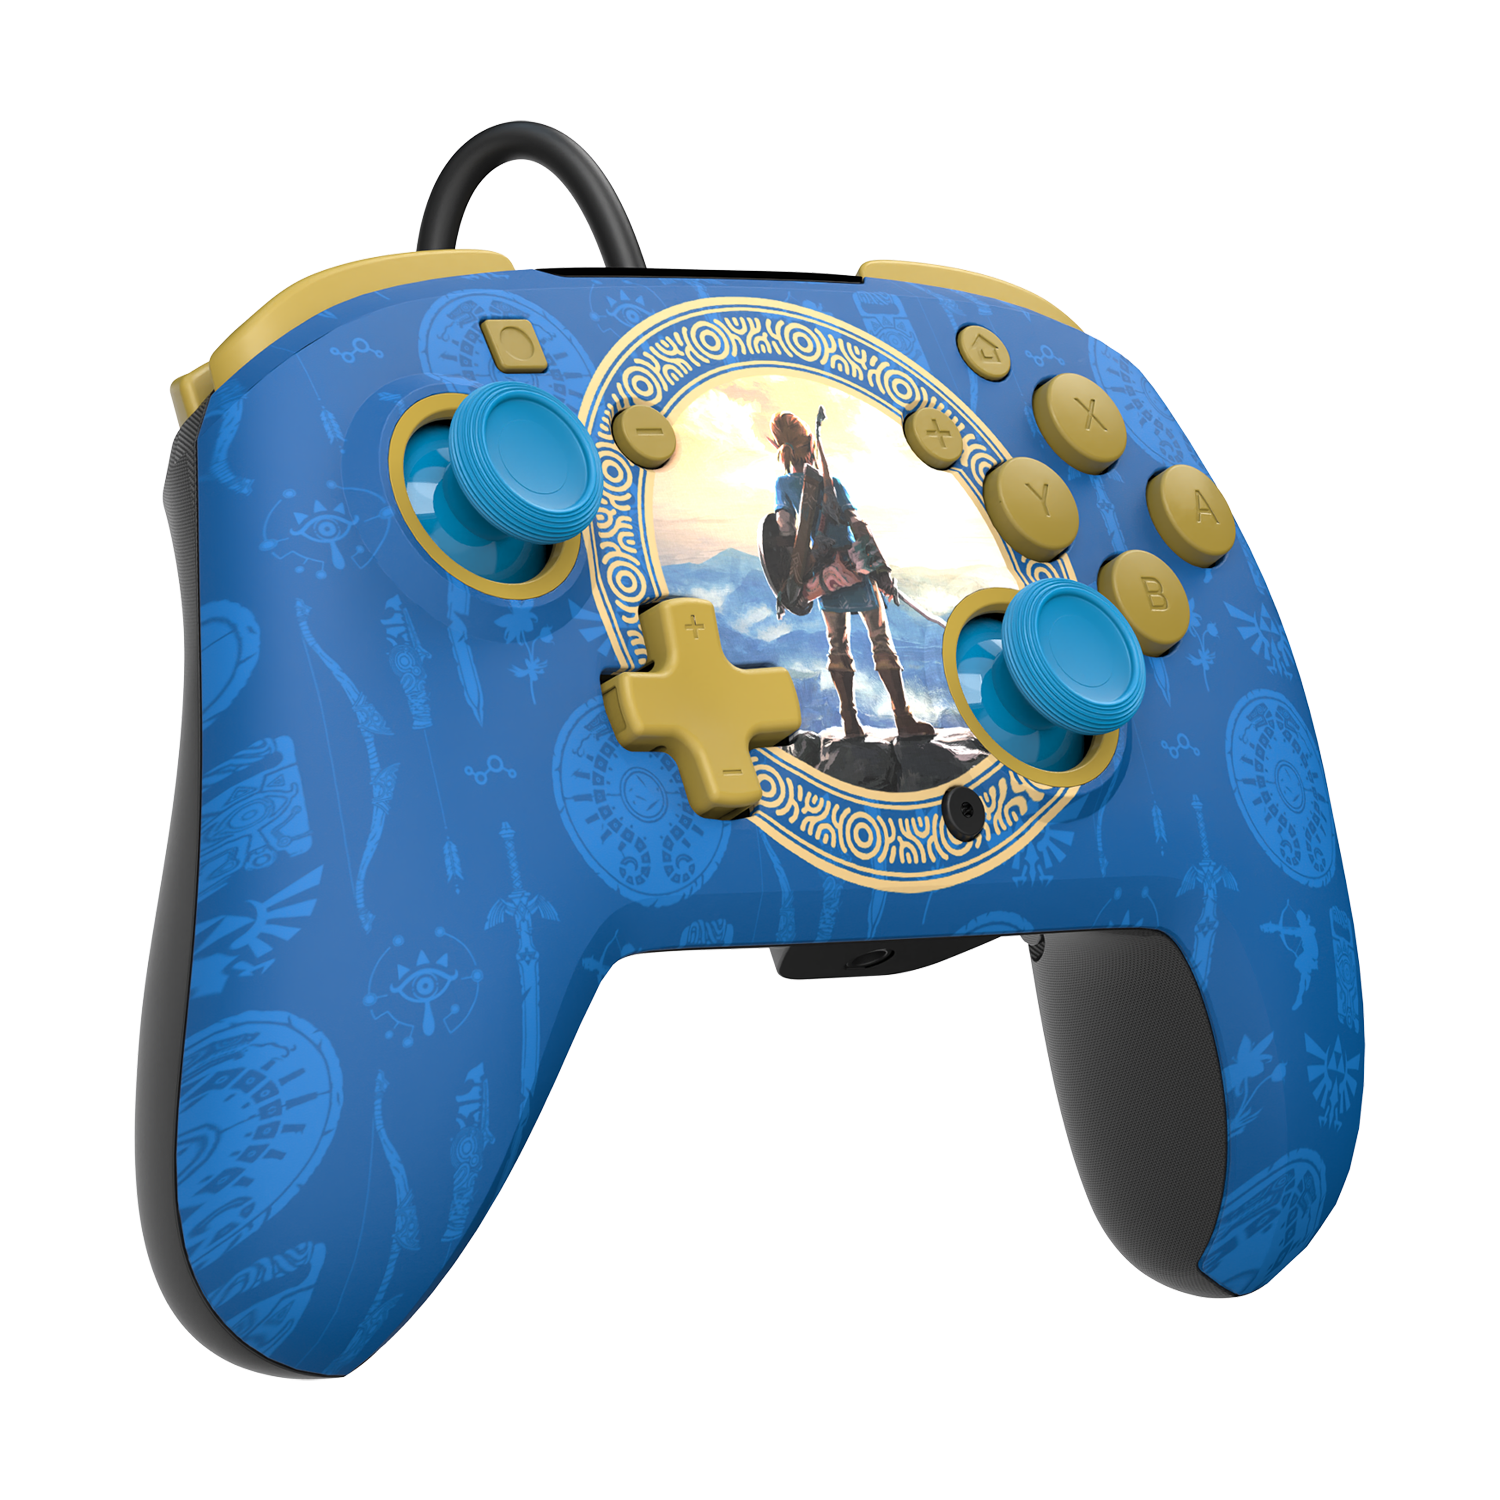 Nintendo Switch Hyrule Blue REMATCH Controller by PDP